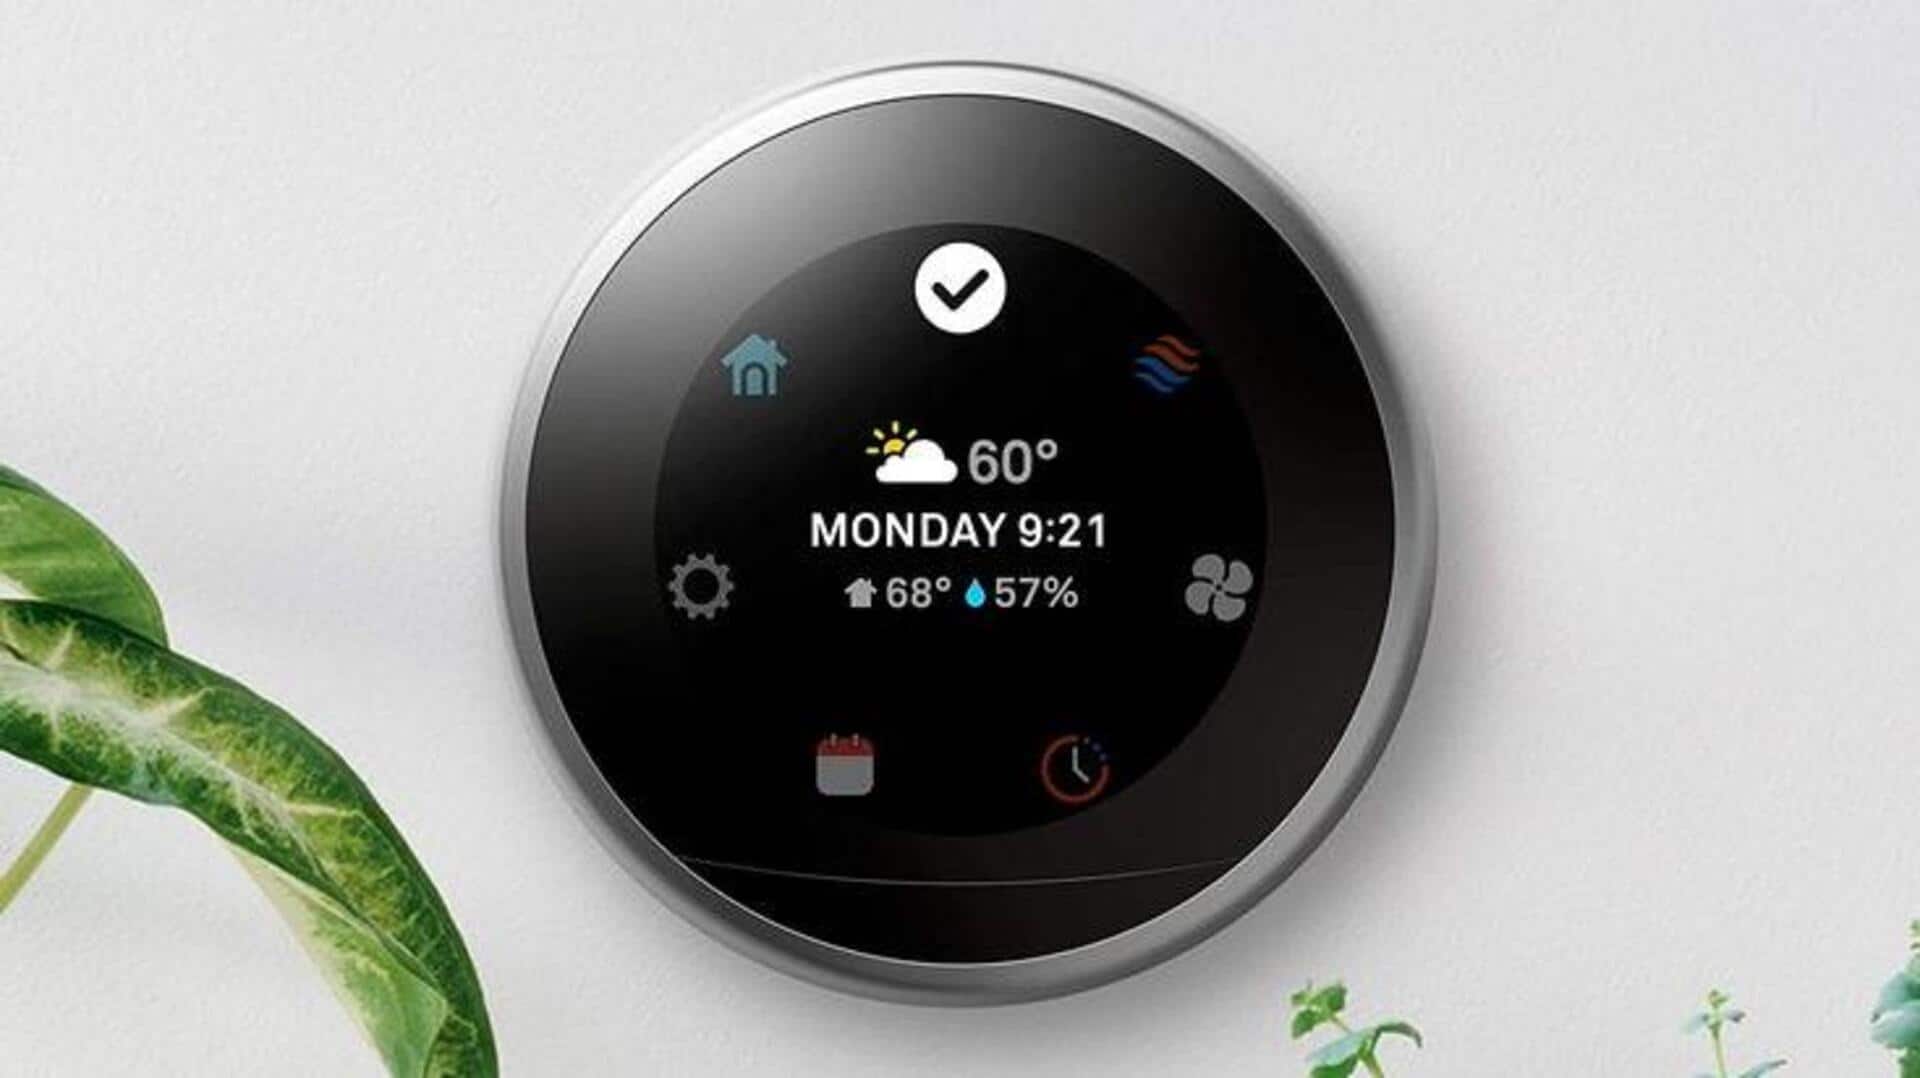 Google Nest Renew joins Alphabet-backed firm to form Renew Home